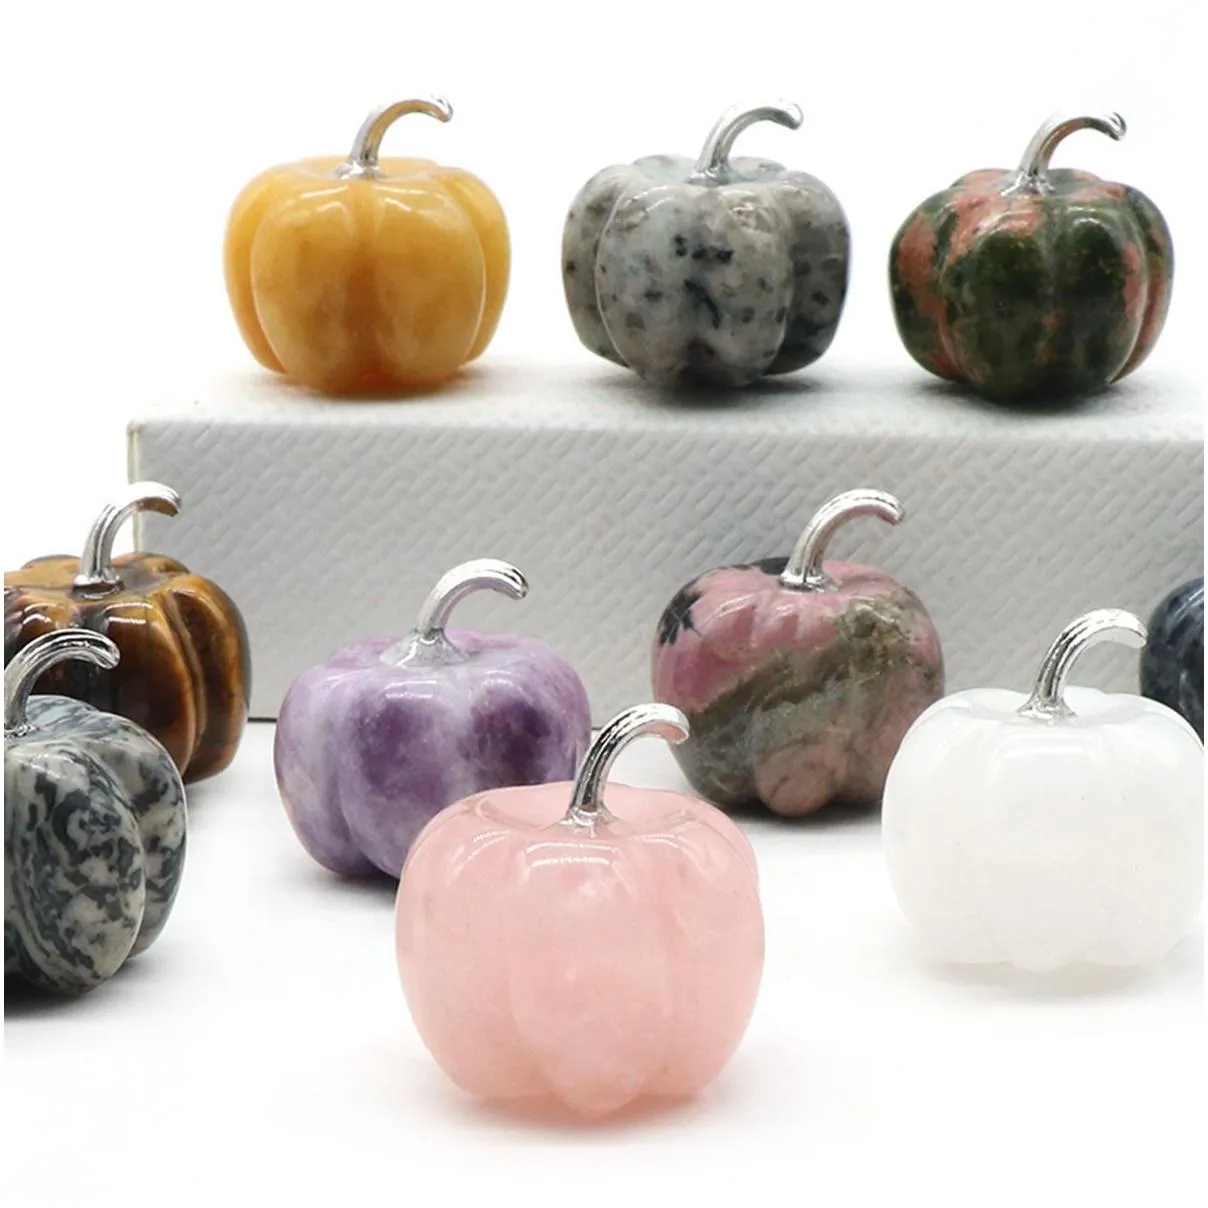 30mm Healing Pumpkin Crazy Stones Natural Crystal Hand Made Carving Pumpkin Shape Stone For Christmas Gifts